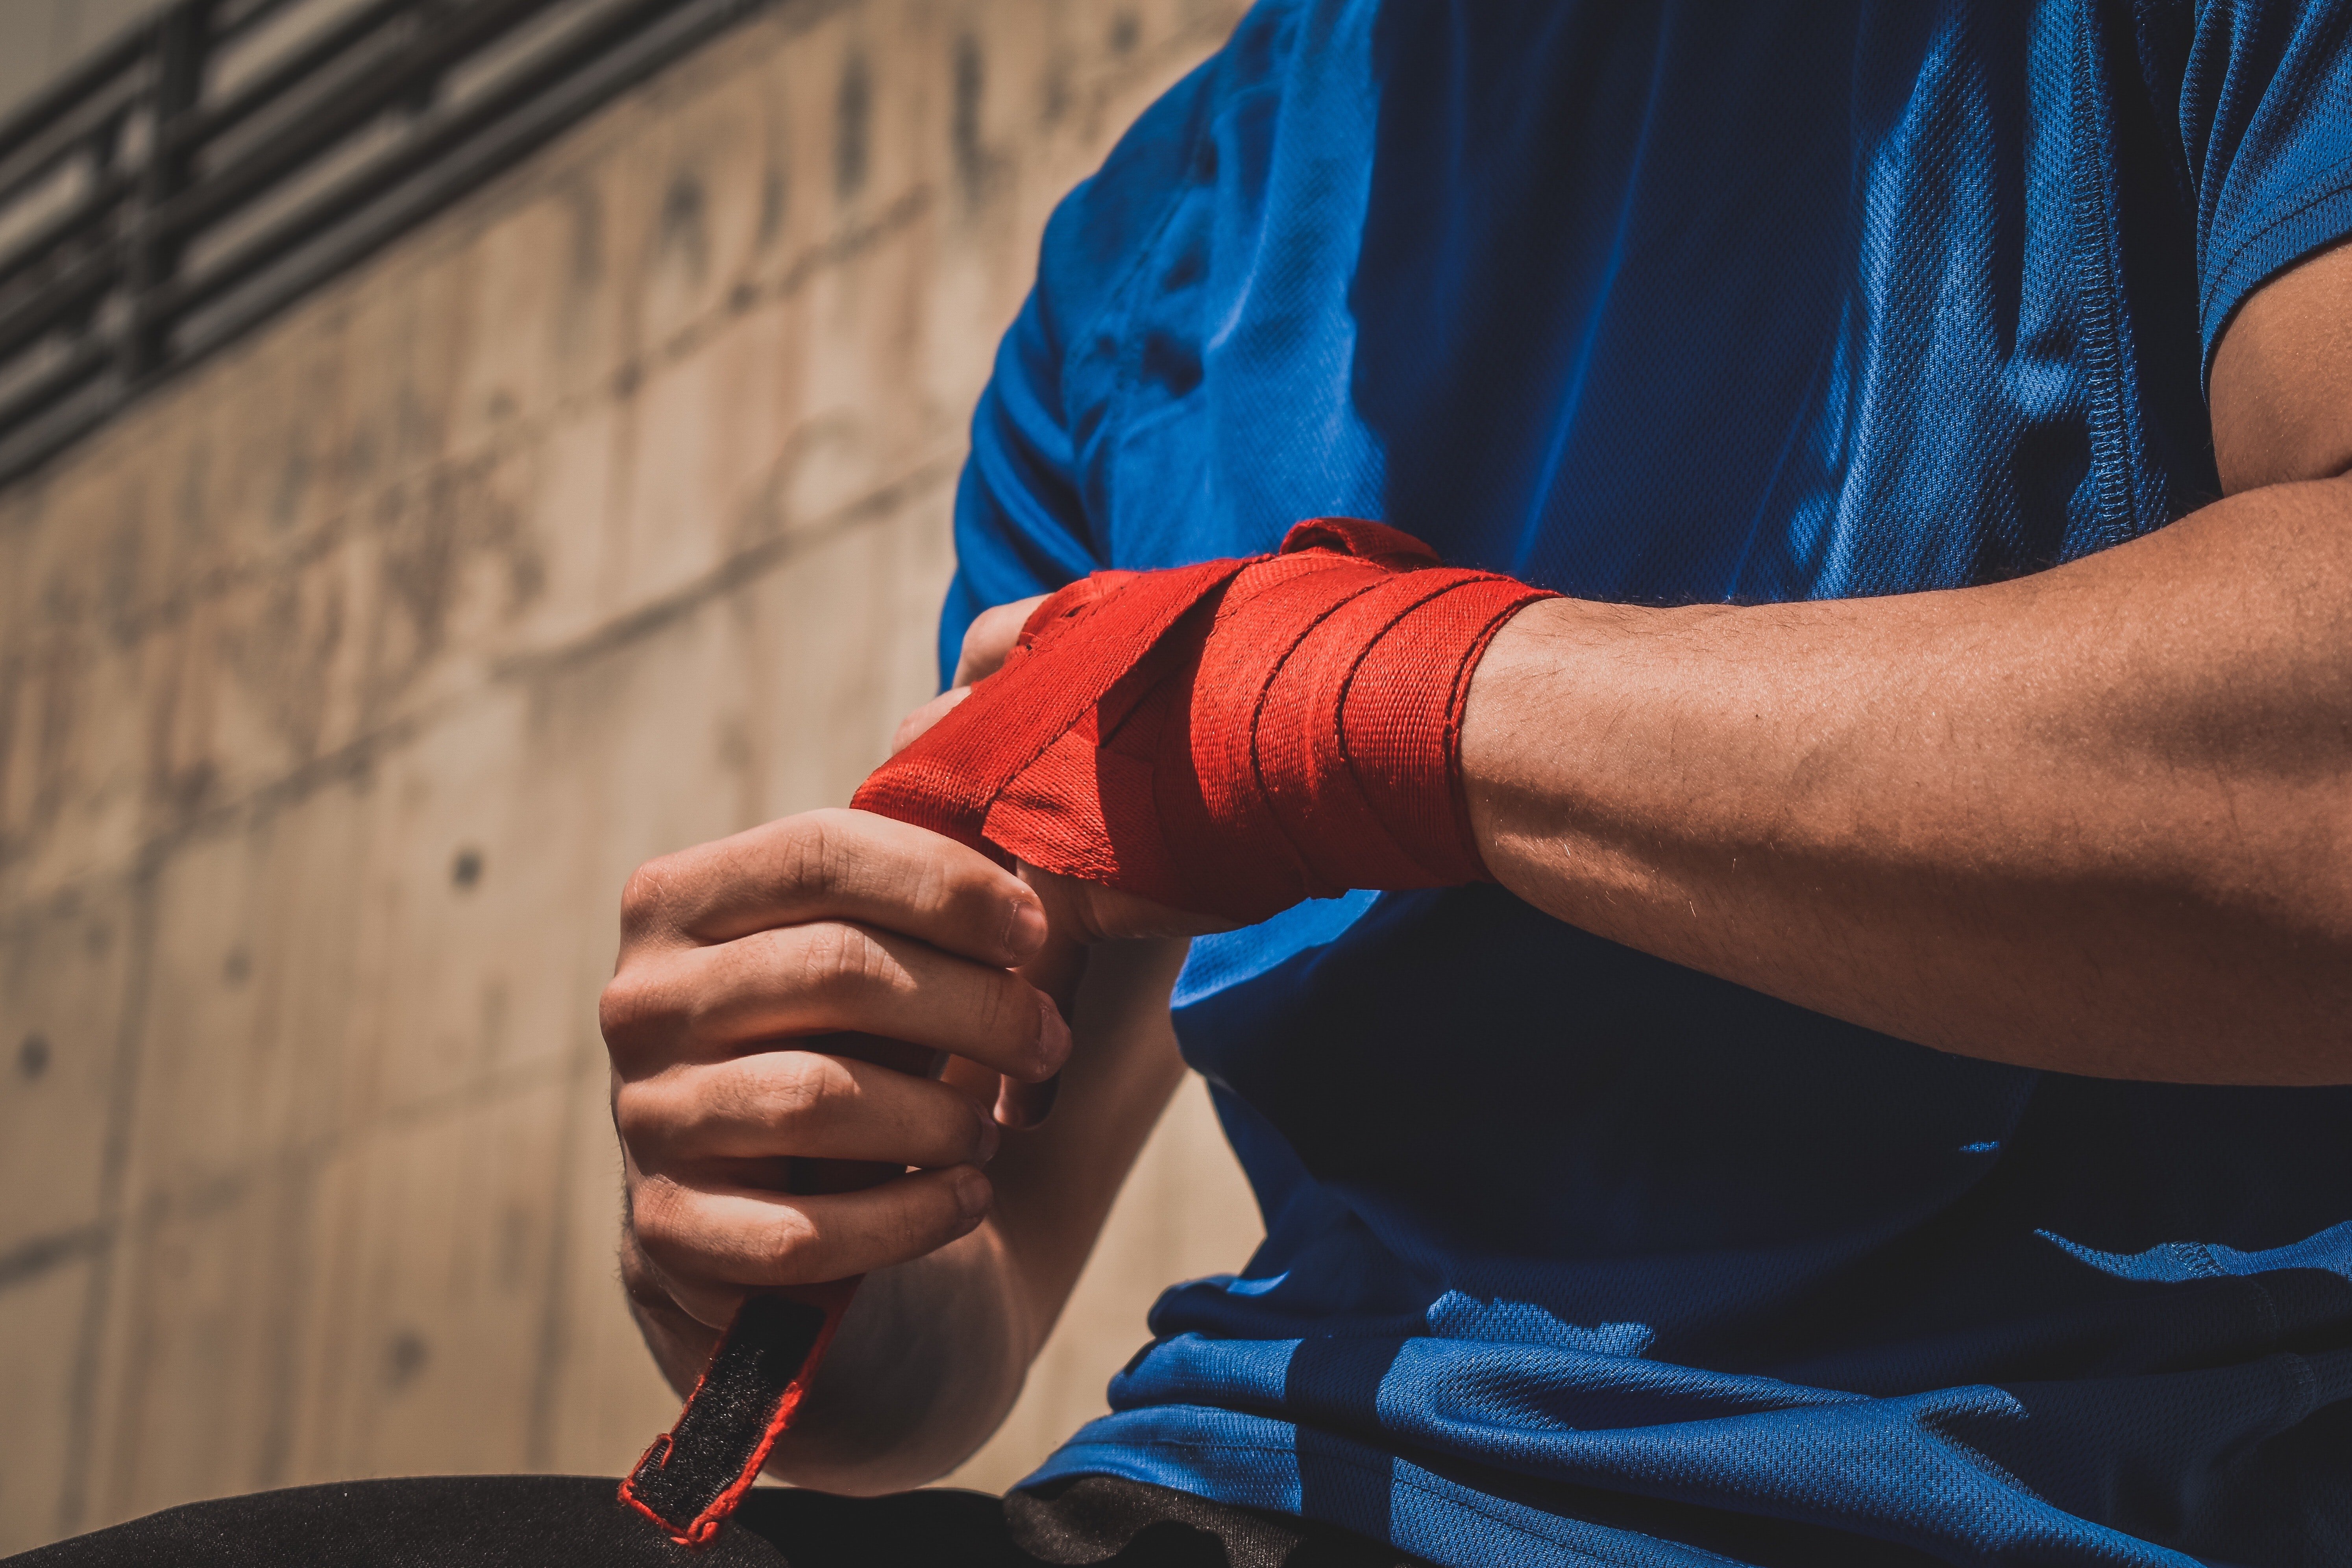 Man wearing a blue T-shirt and fixing his boxing hand wrap  | Source: Unsplash / Payam Tahery